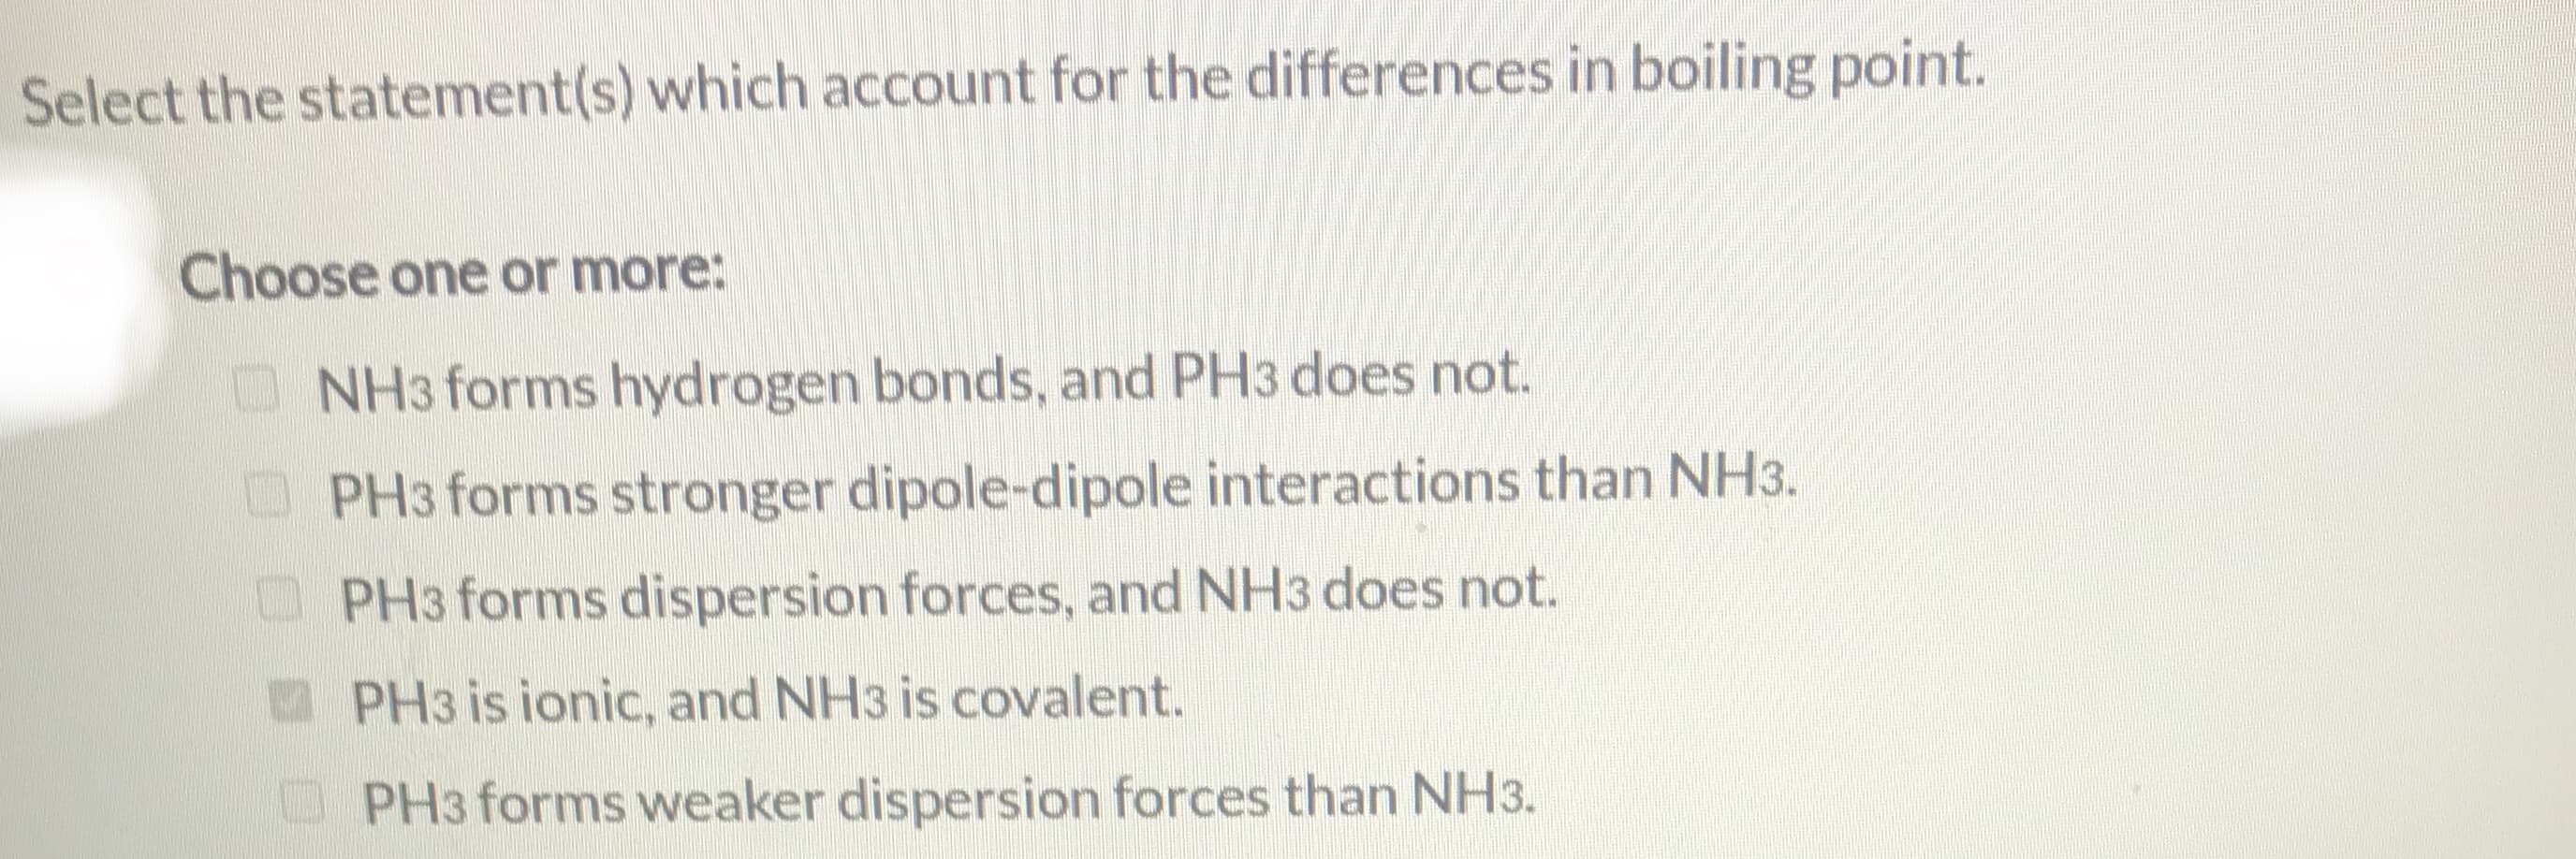 Select the statement(s) which account for the differences in boiling point.
Choose one or more:
O NH3 forms hydrogen bonds, and PH3 does not.
PH3 forms stronger dipole-dipole interactions than NH3.
PH3 forms dispersion forces, and NH3 does not.
PH3 is ionic, and NH3 is covalent.
PH3 forms weaker dispersion forces than NH3.
